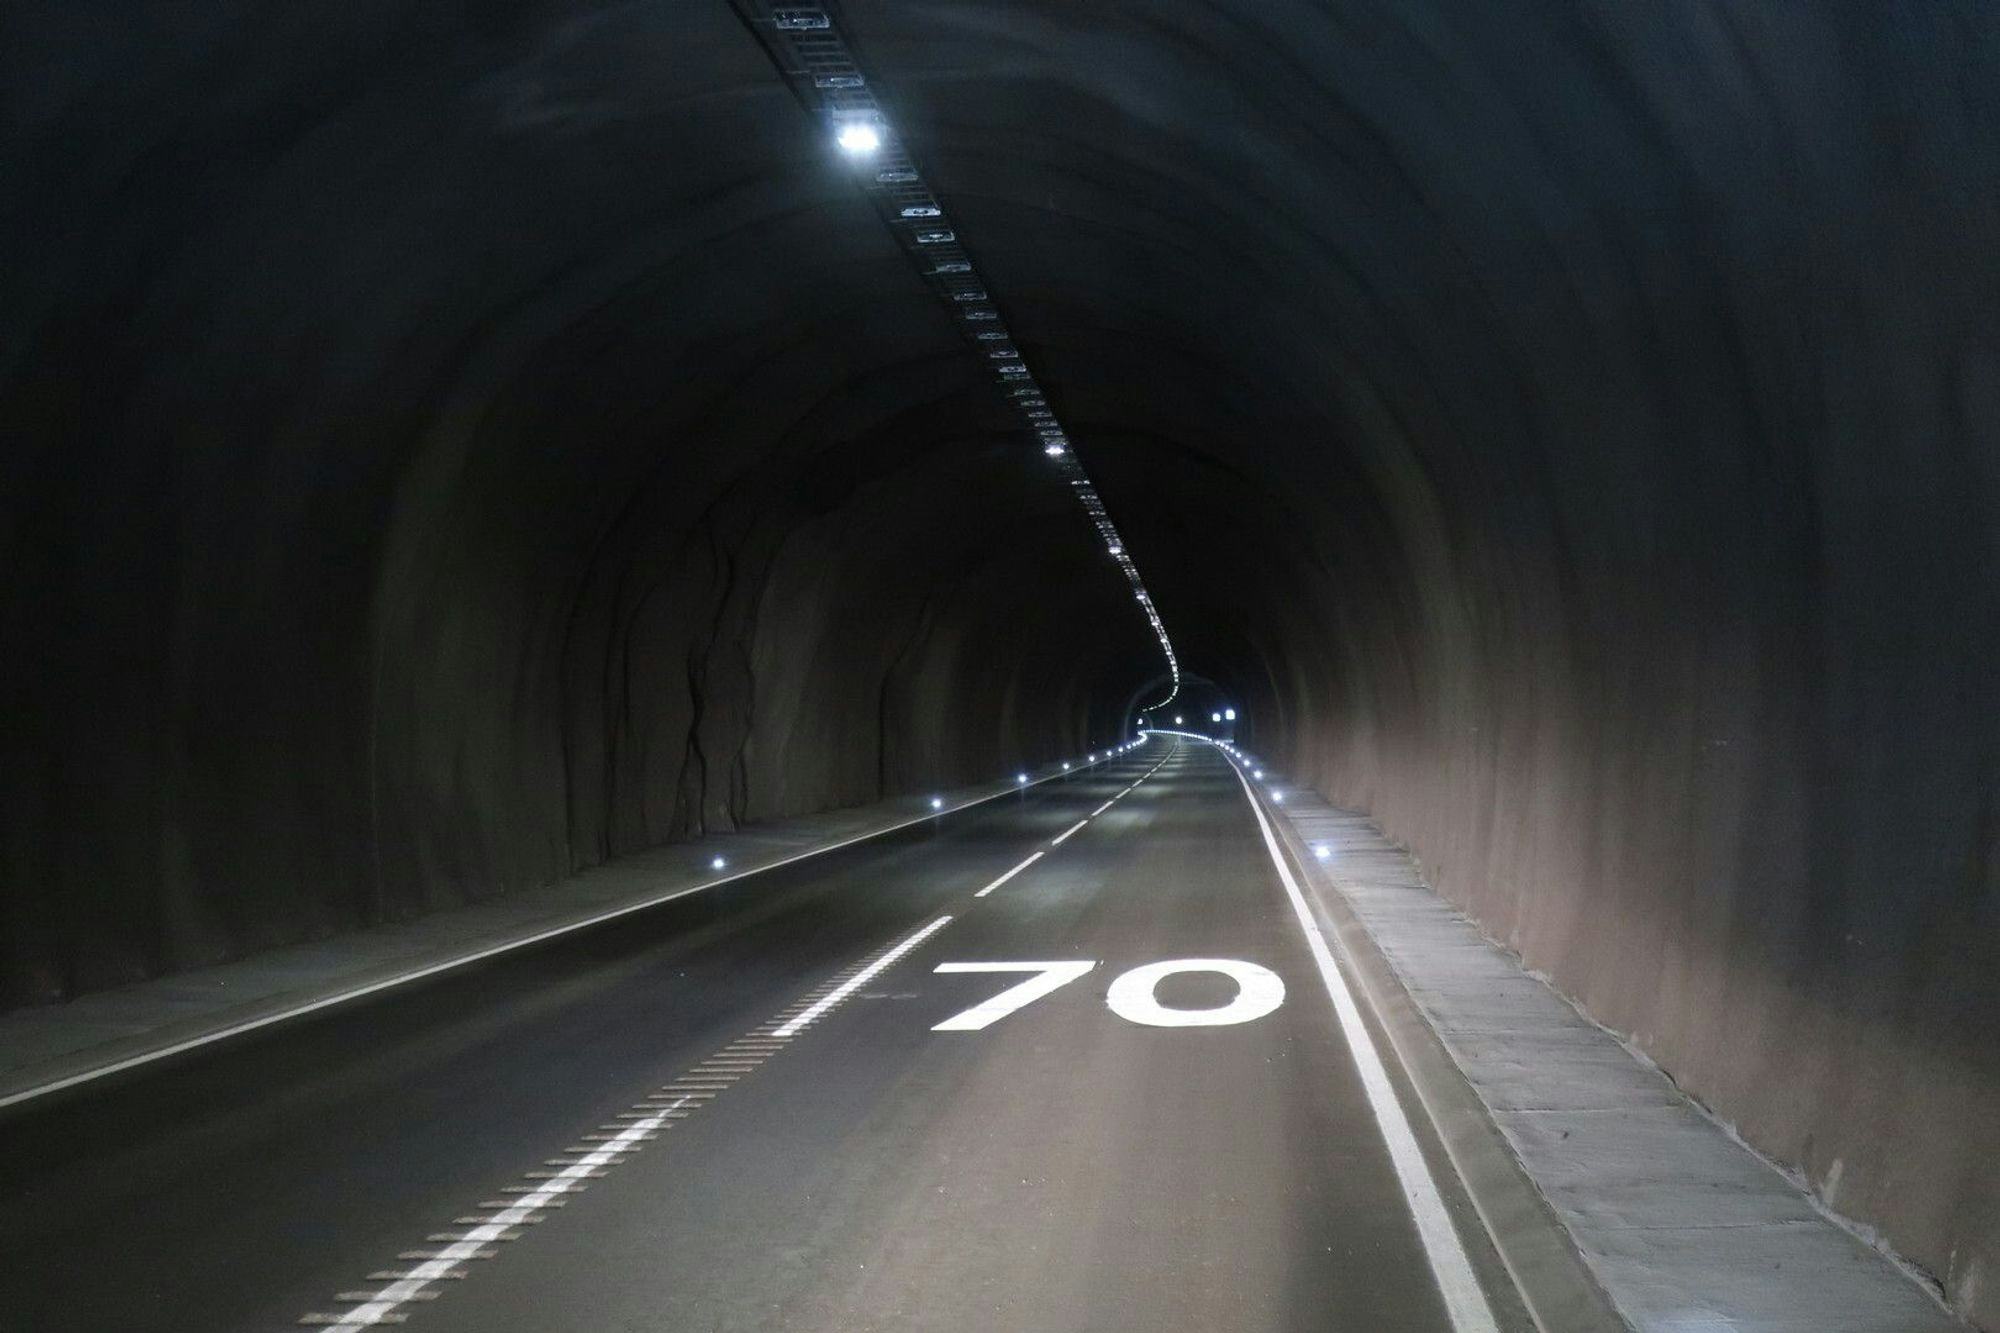 Interior of a well lit tunnel showing the speed limit is 70